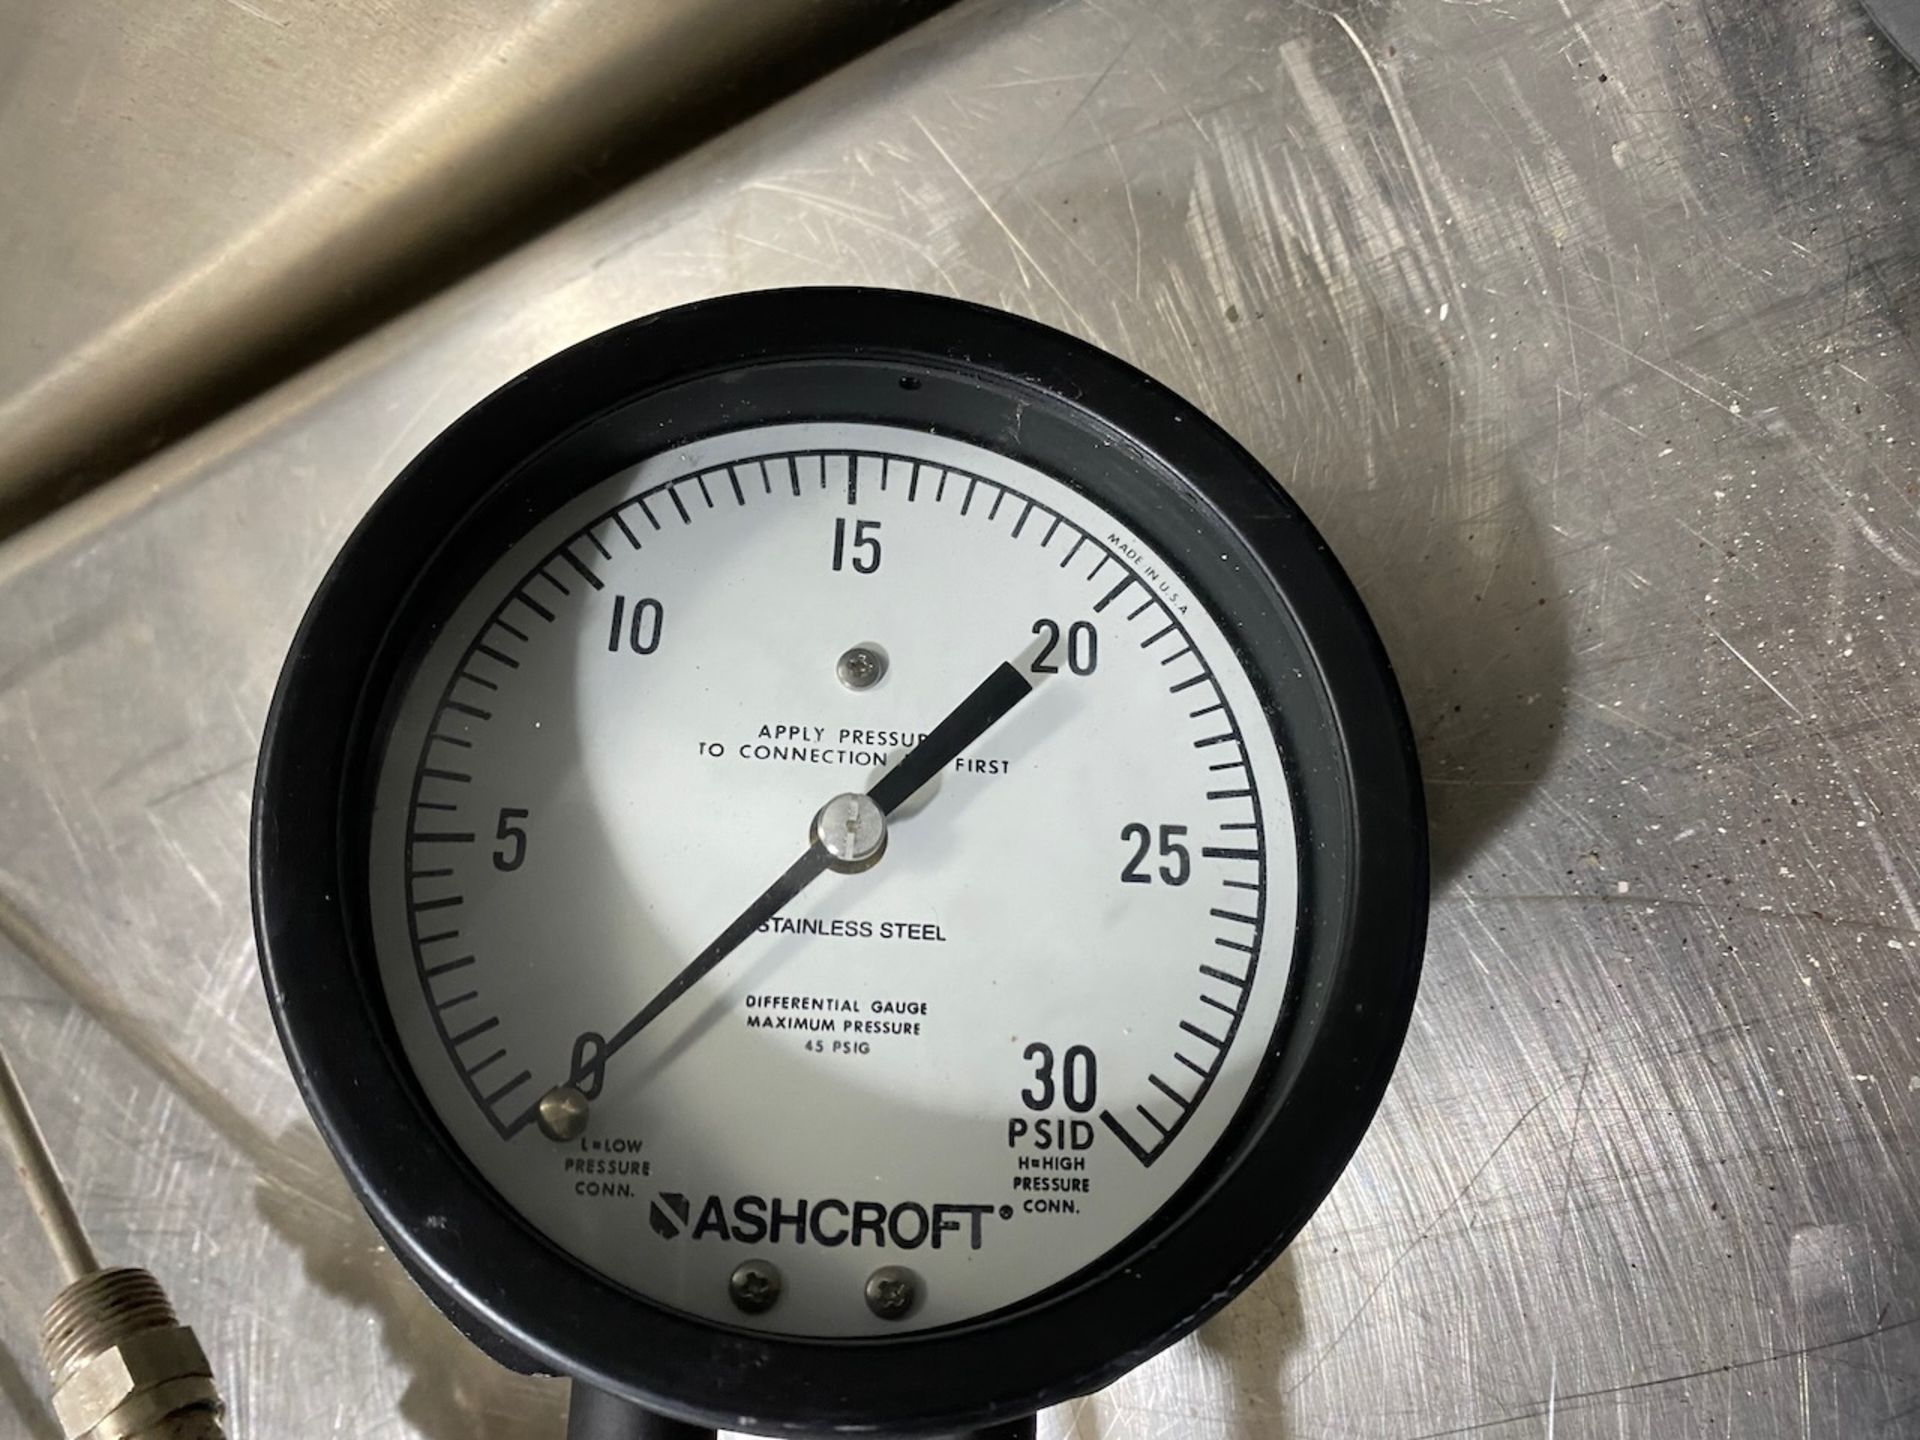 Lot of Pressure and Temperature Gauges - Image 3 of 9